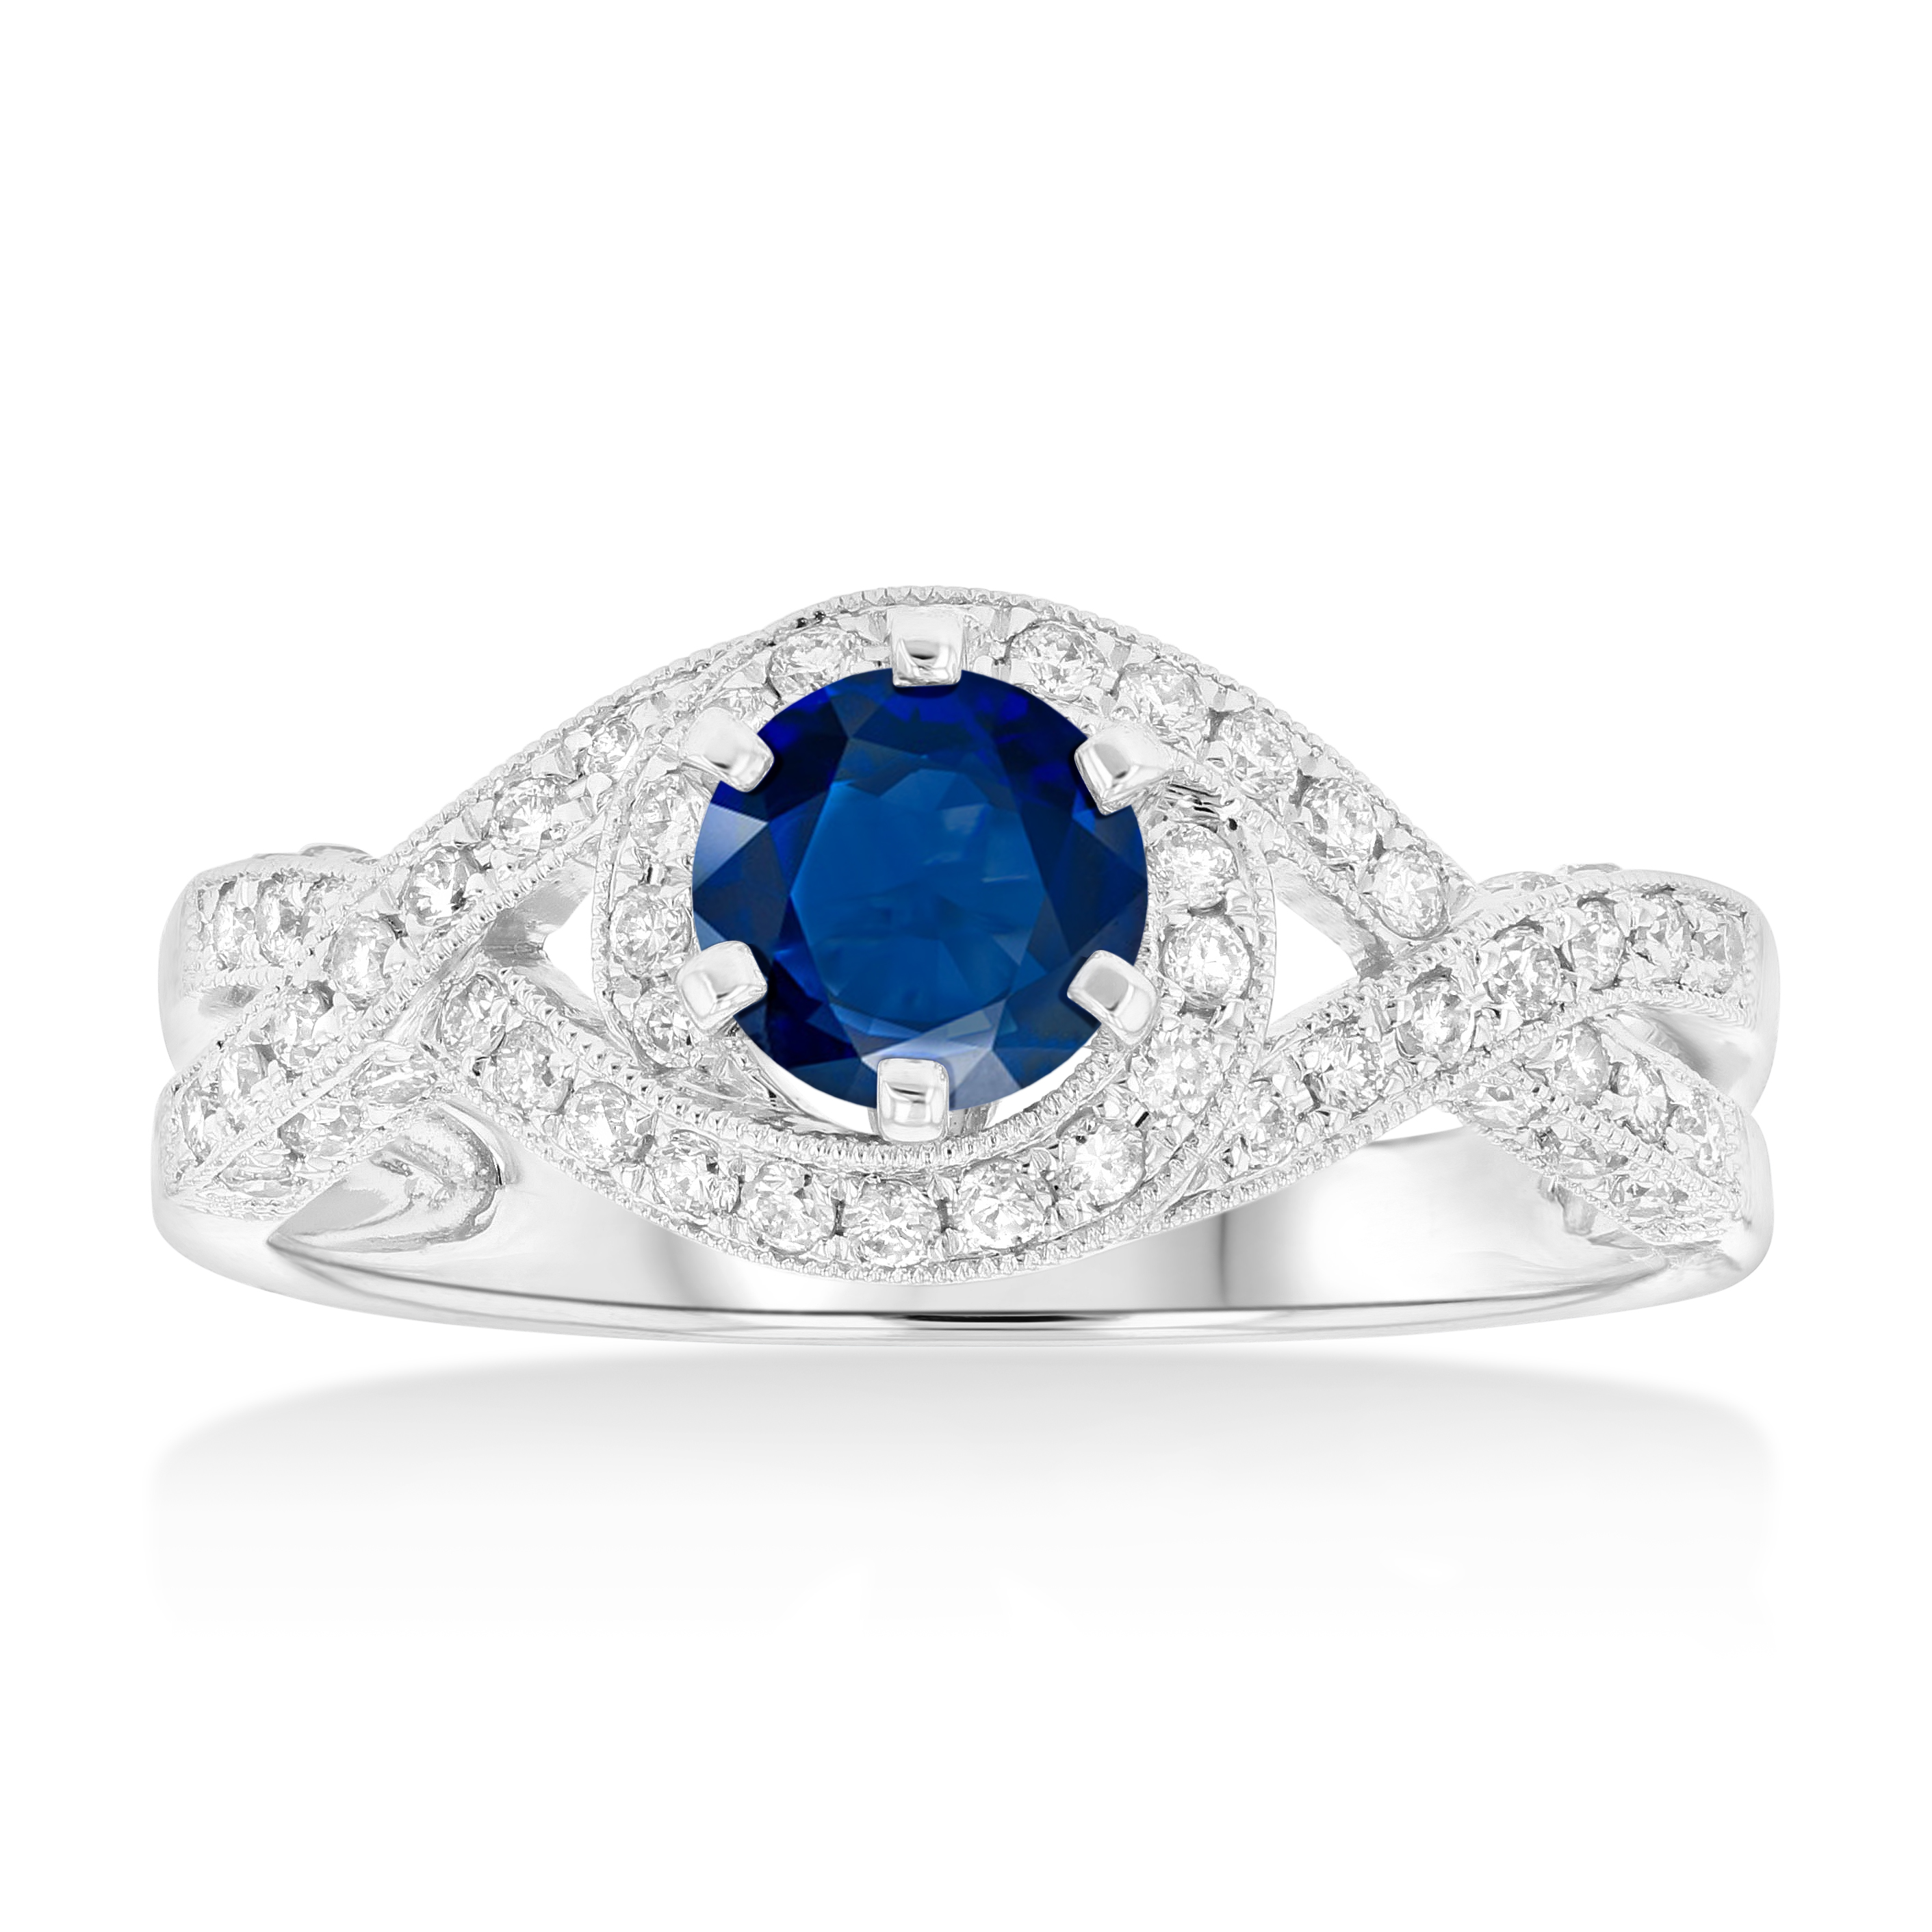 View 1.35ctw Diamond and Sapphire Engagement Ring in 14k White Gold